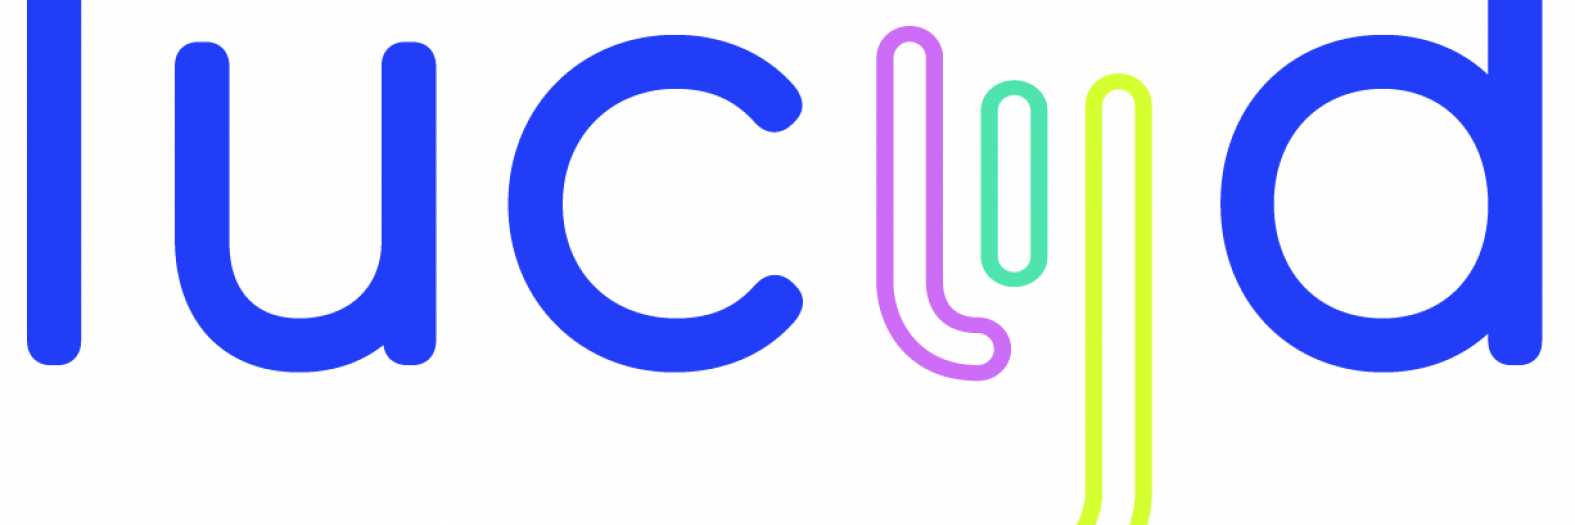 lucyd-logo_blue.png